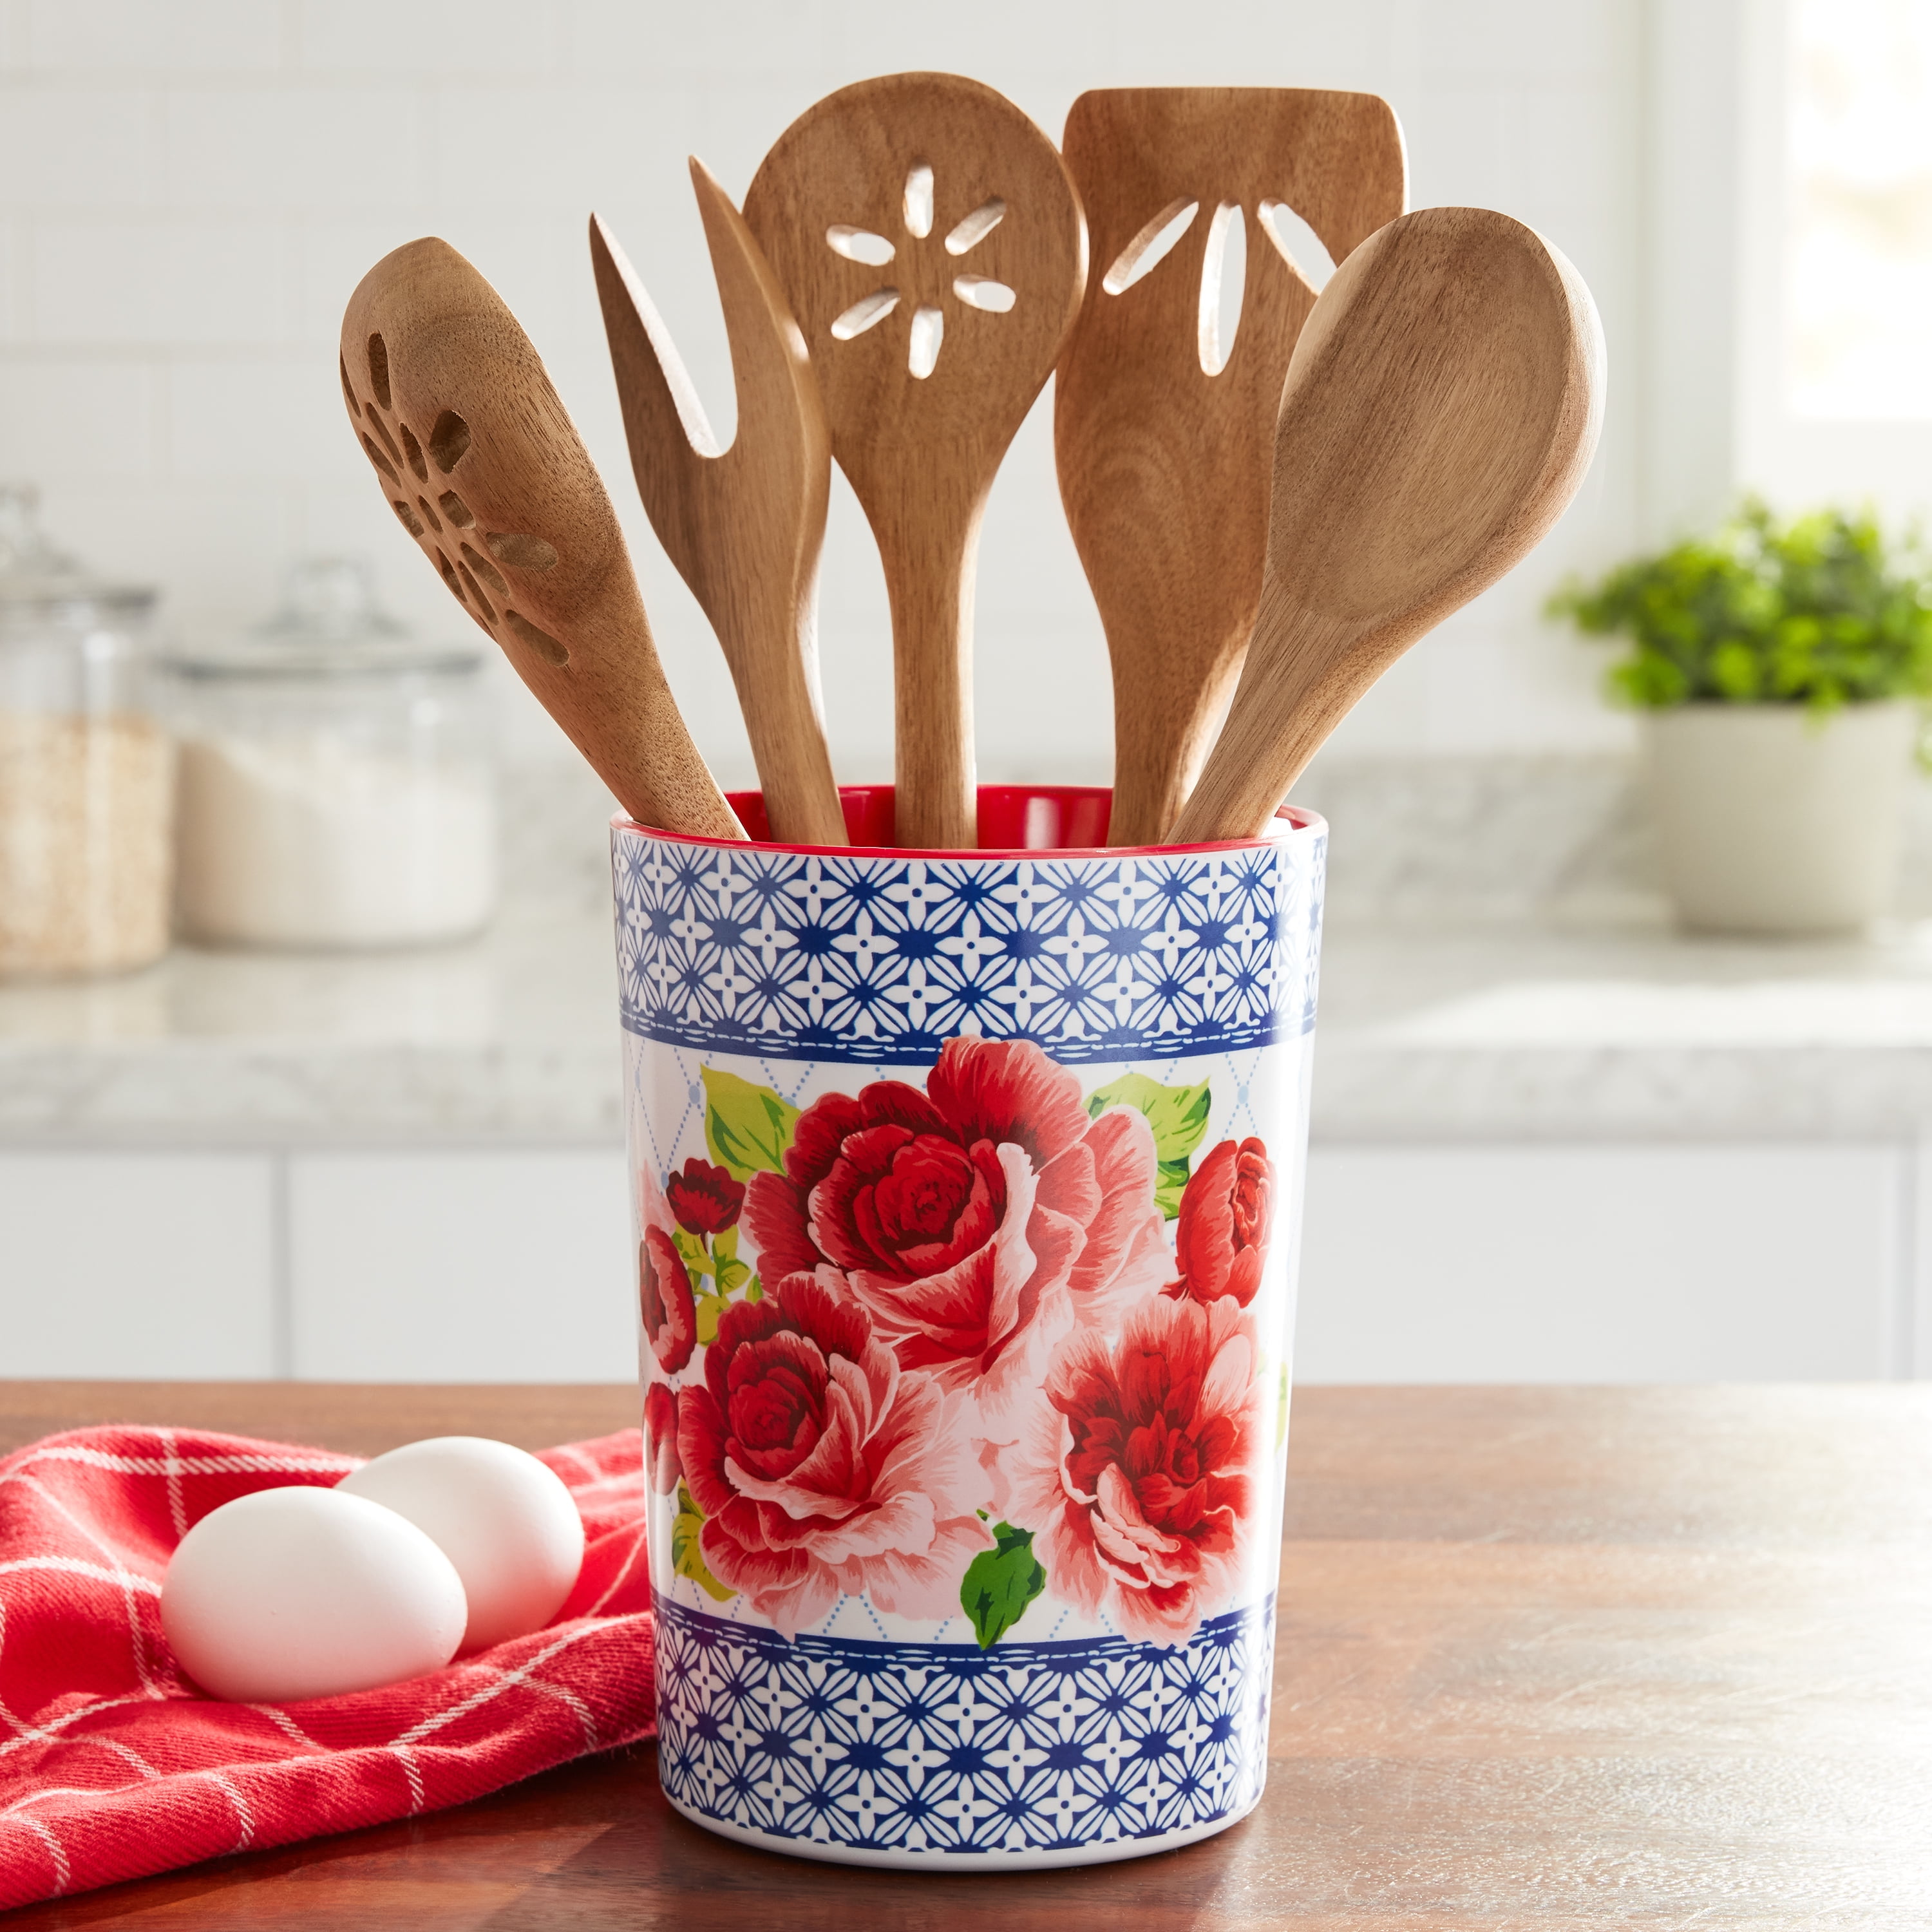 The Pioneer Woman Floral Medley 3-Compartment Ceramic Utensil